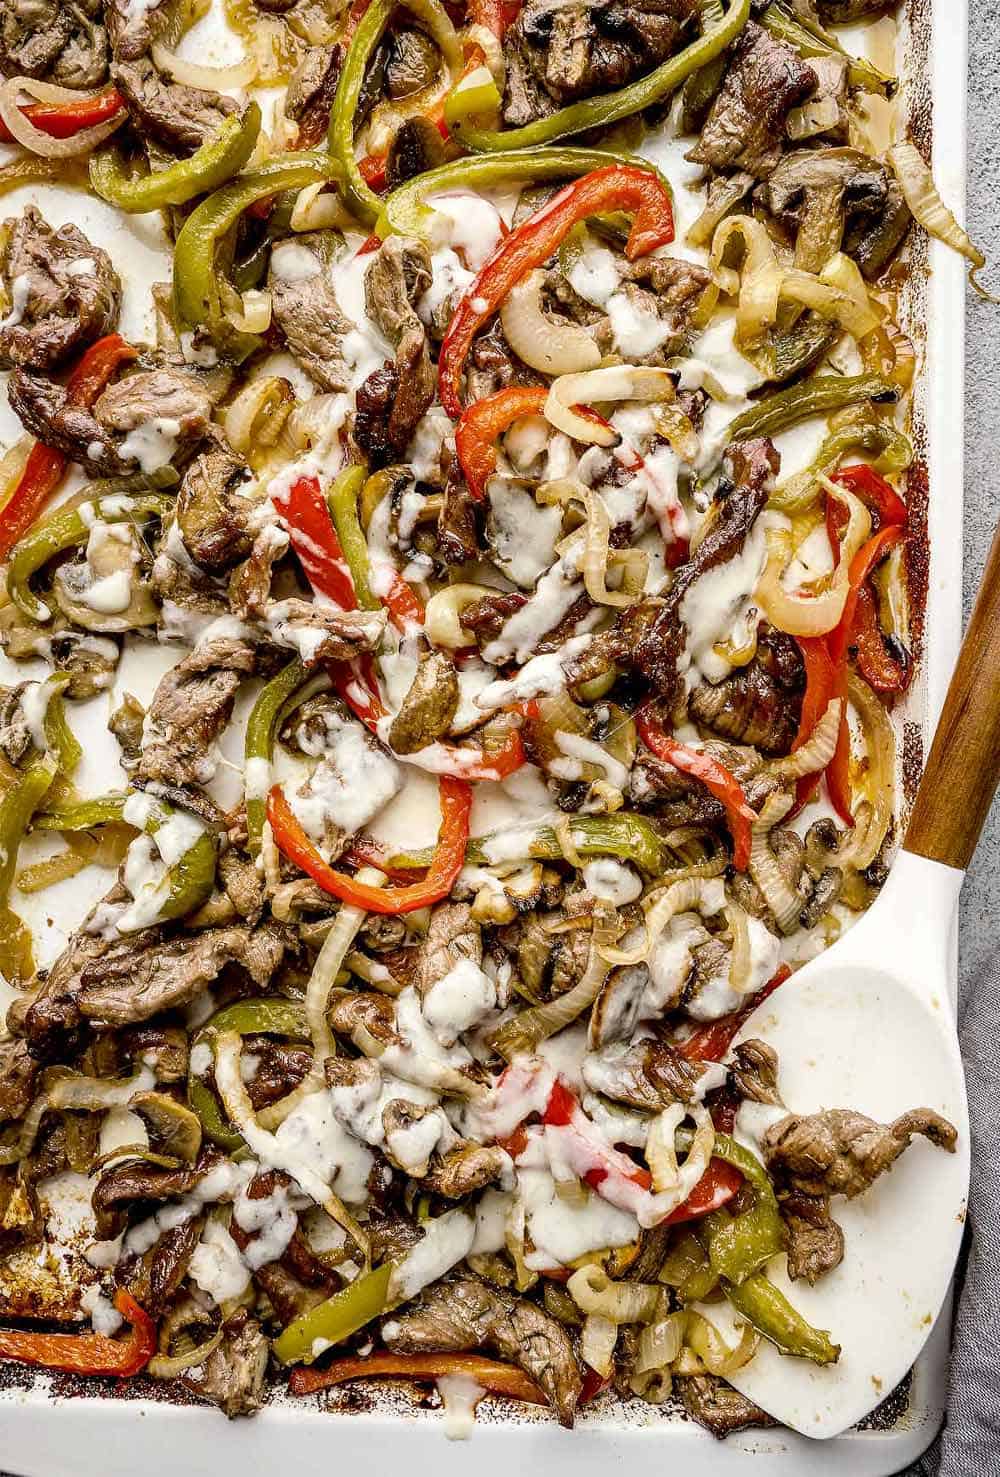 Baked Philly cheesesteak on a baking sheet, drizzled with homemade provolone cheese sauce and roasted vegetables.